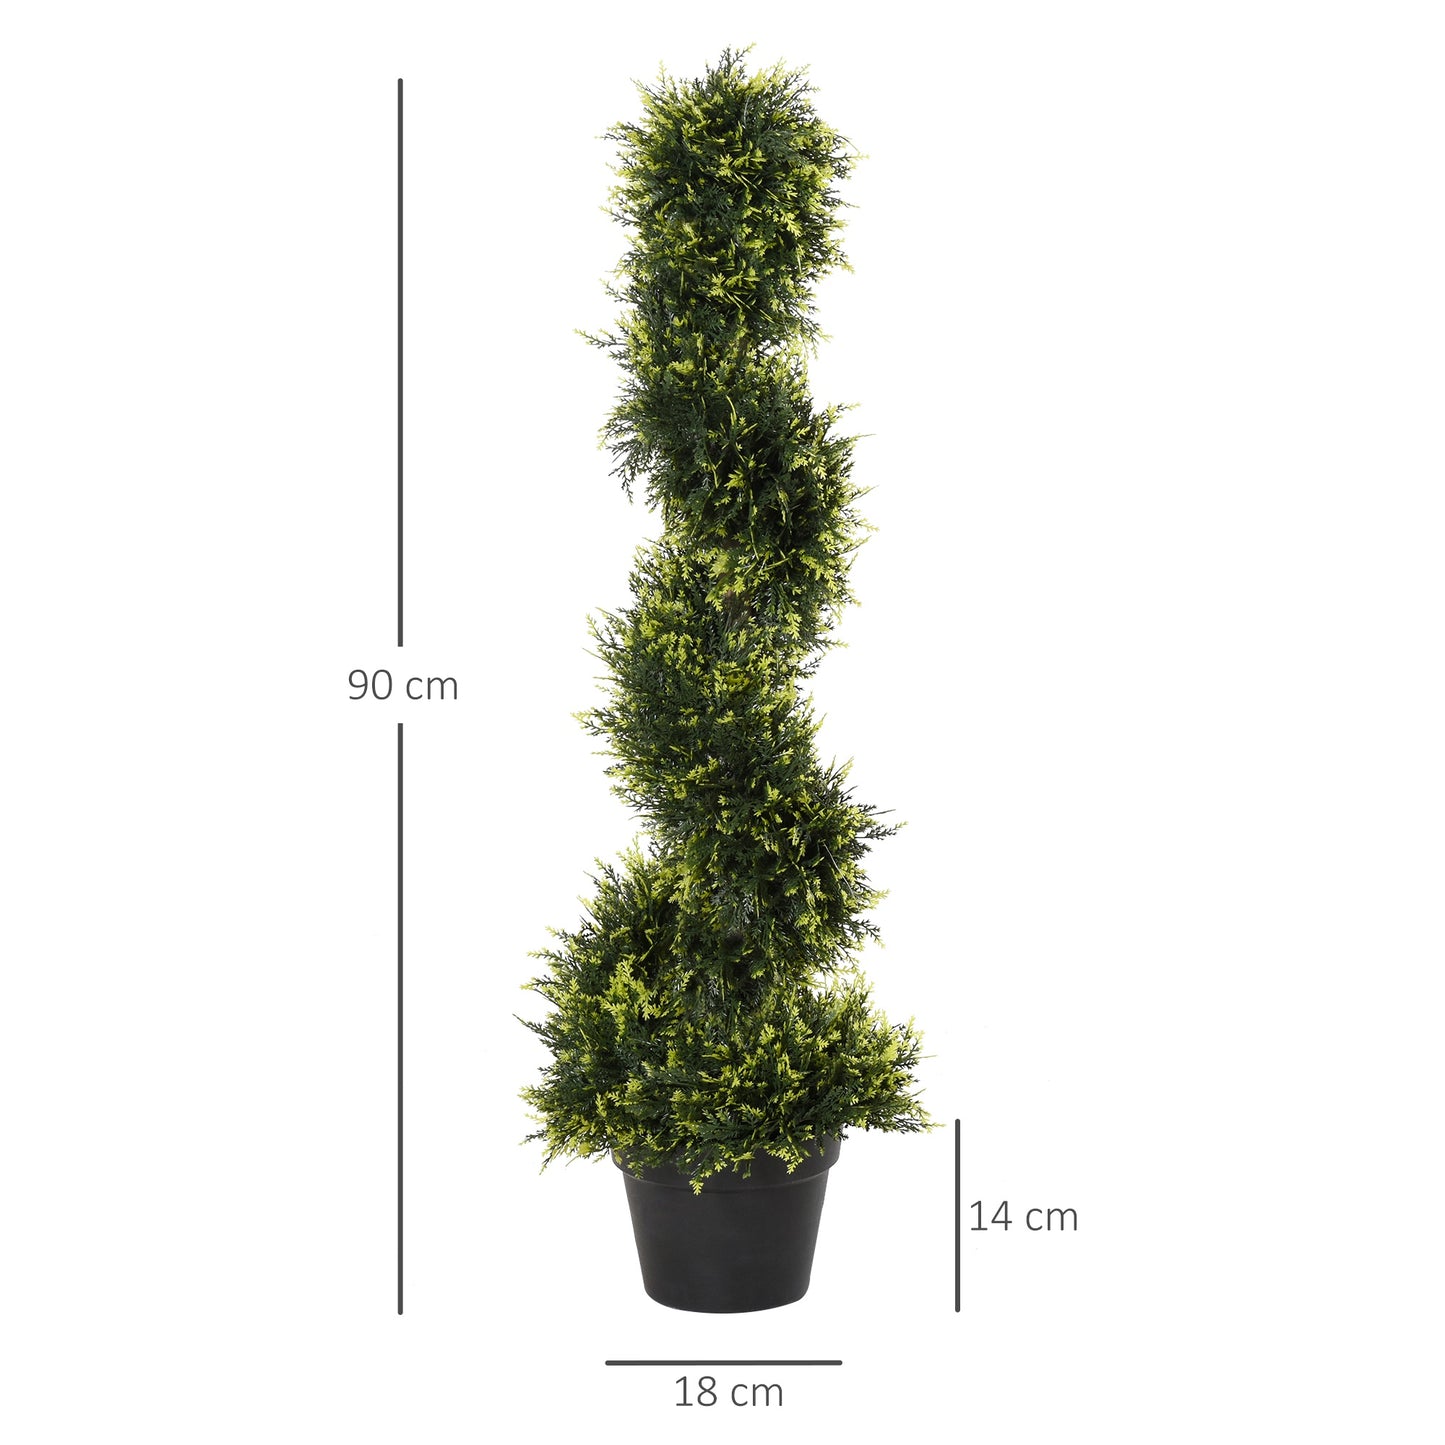 Outsunny Set Of 2 90cm Artificial Spiral Topiary Trees w/ Pot Fake Indoor Outdoor Plant